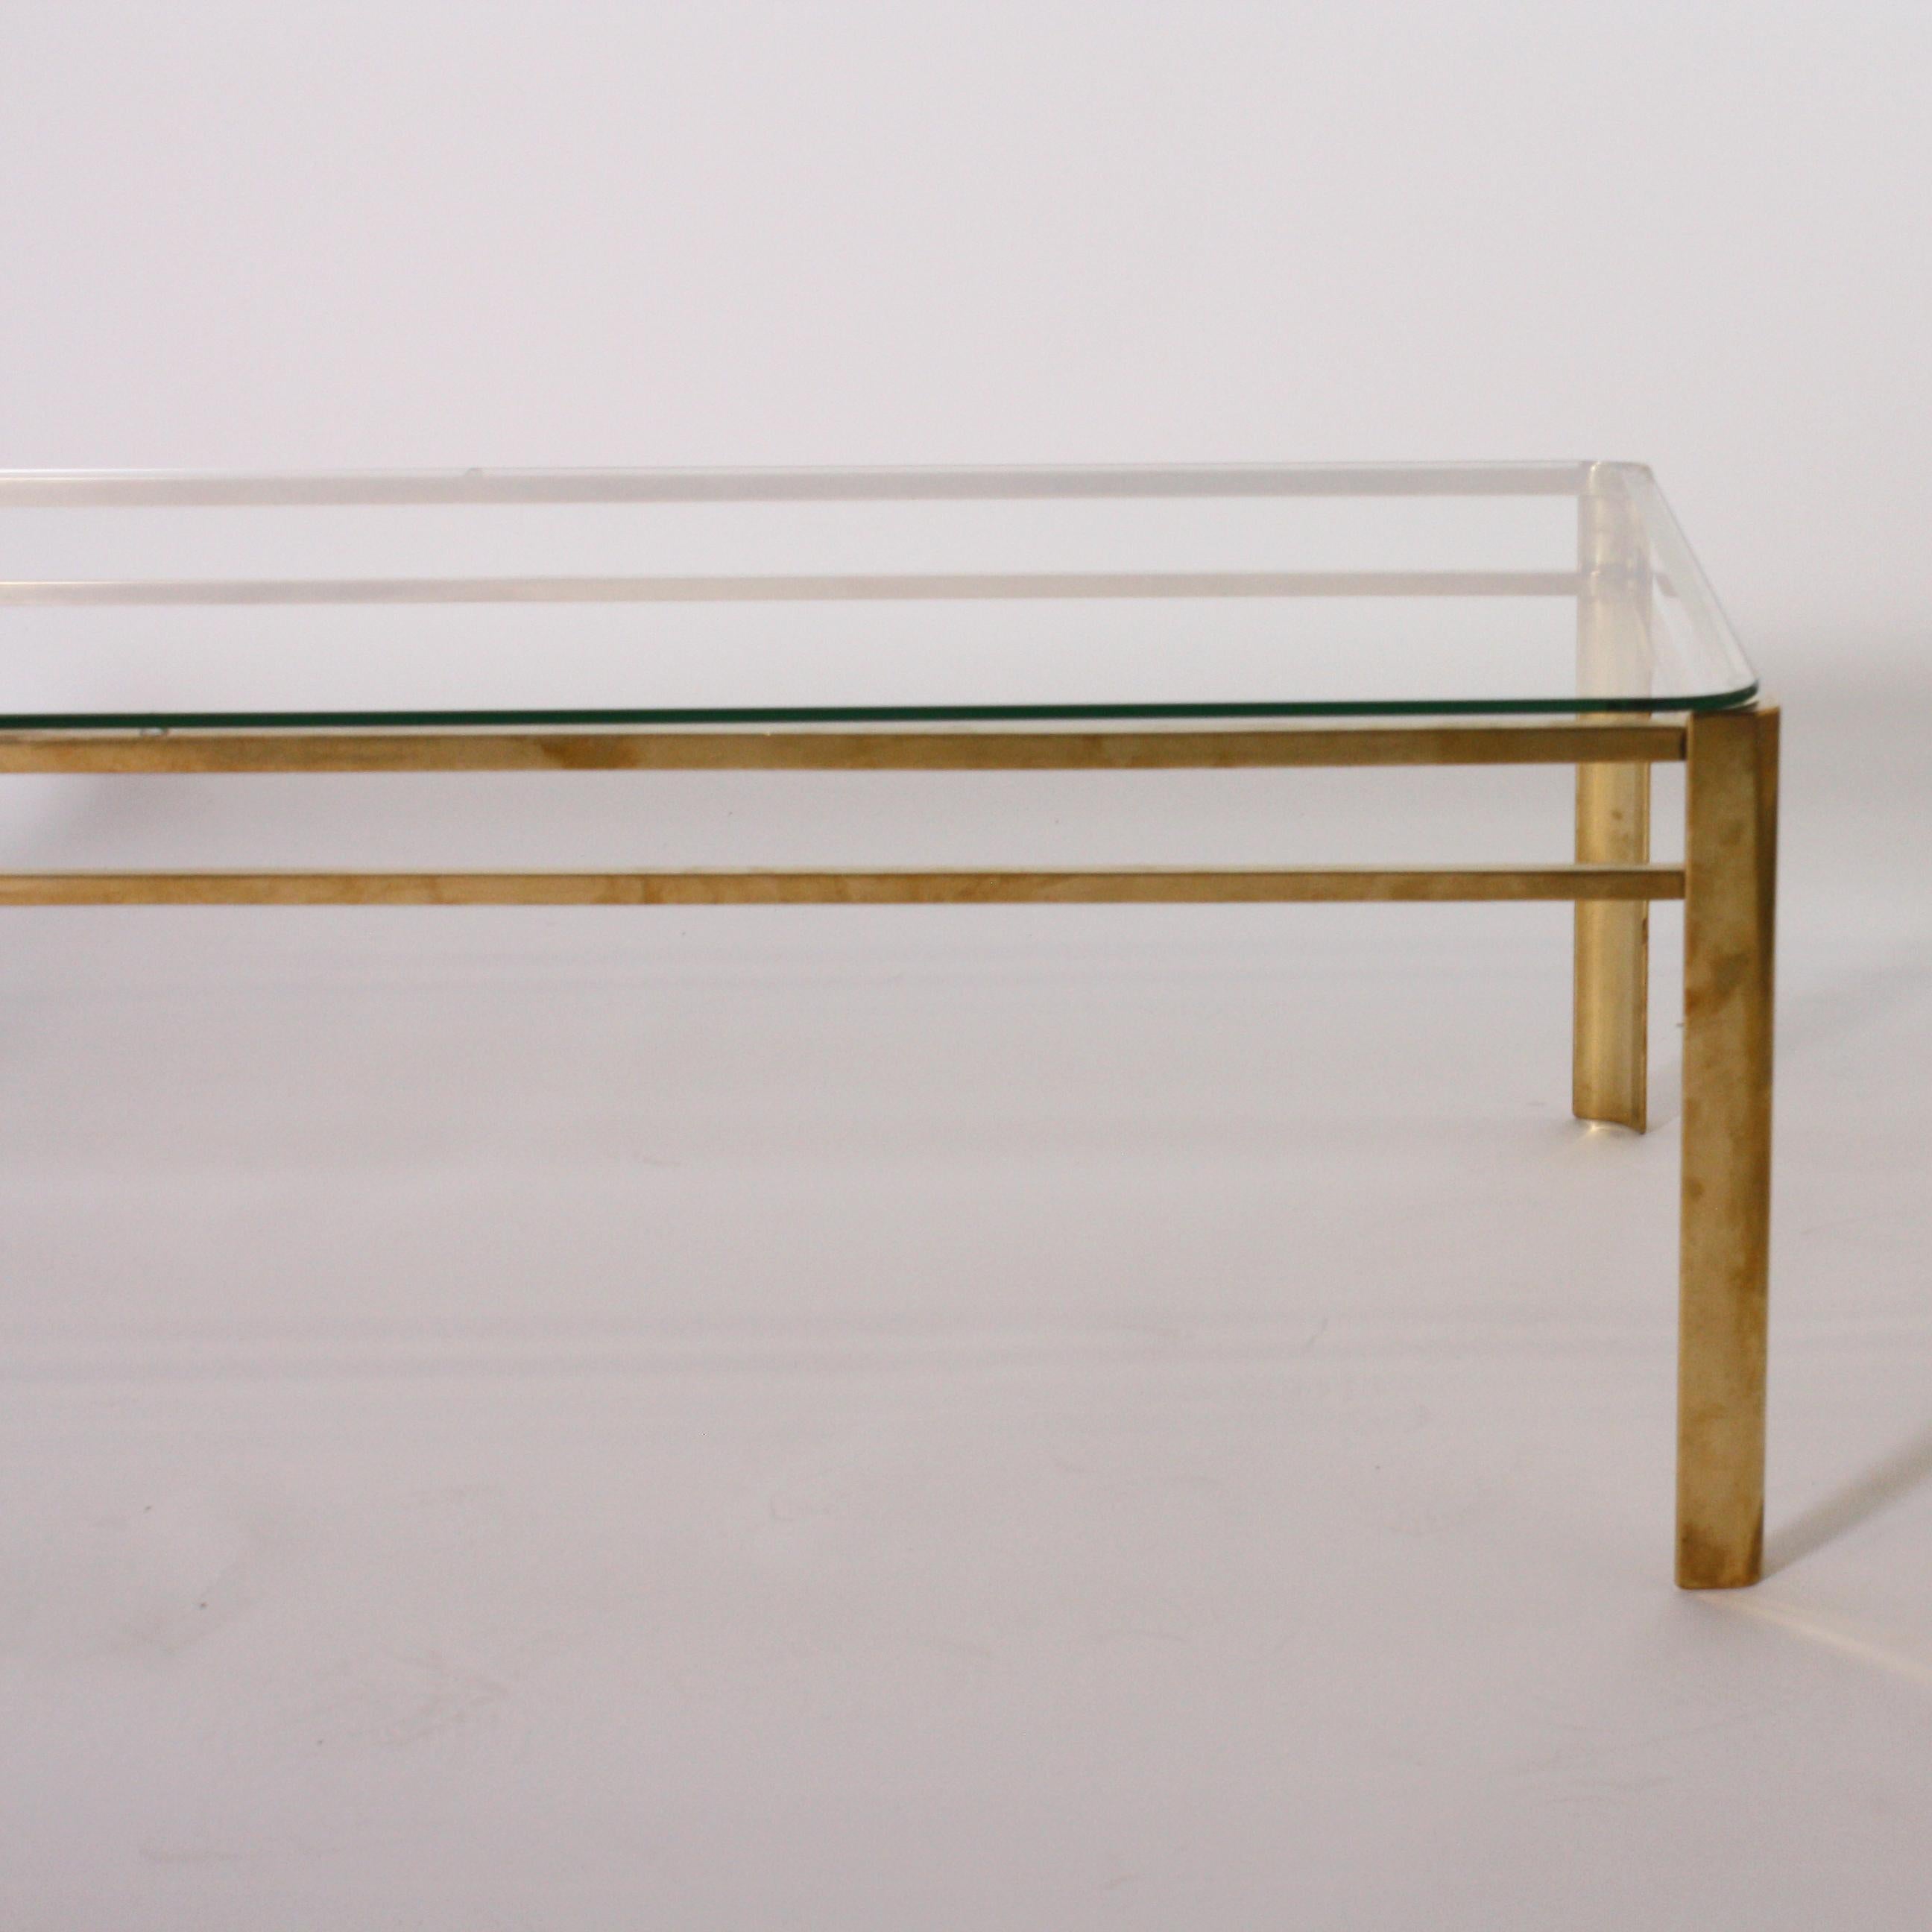 Brass & glass coffee table by Jacques Quinet, circa1960.